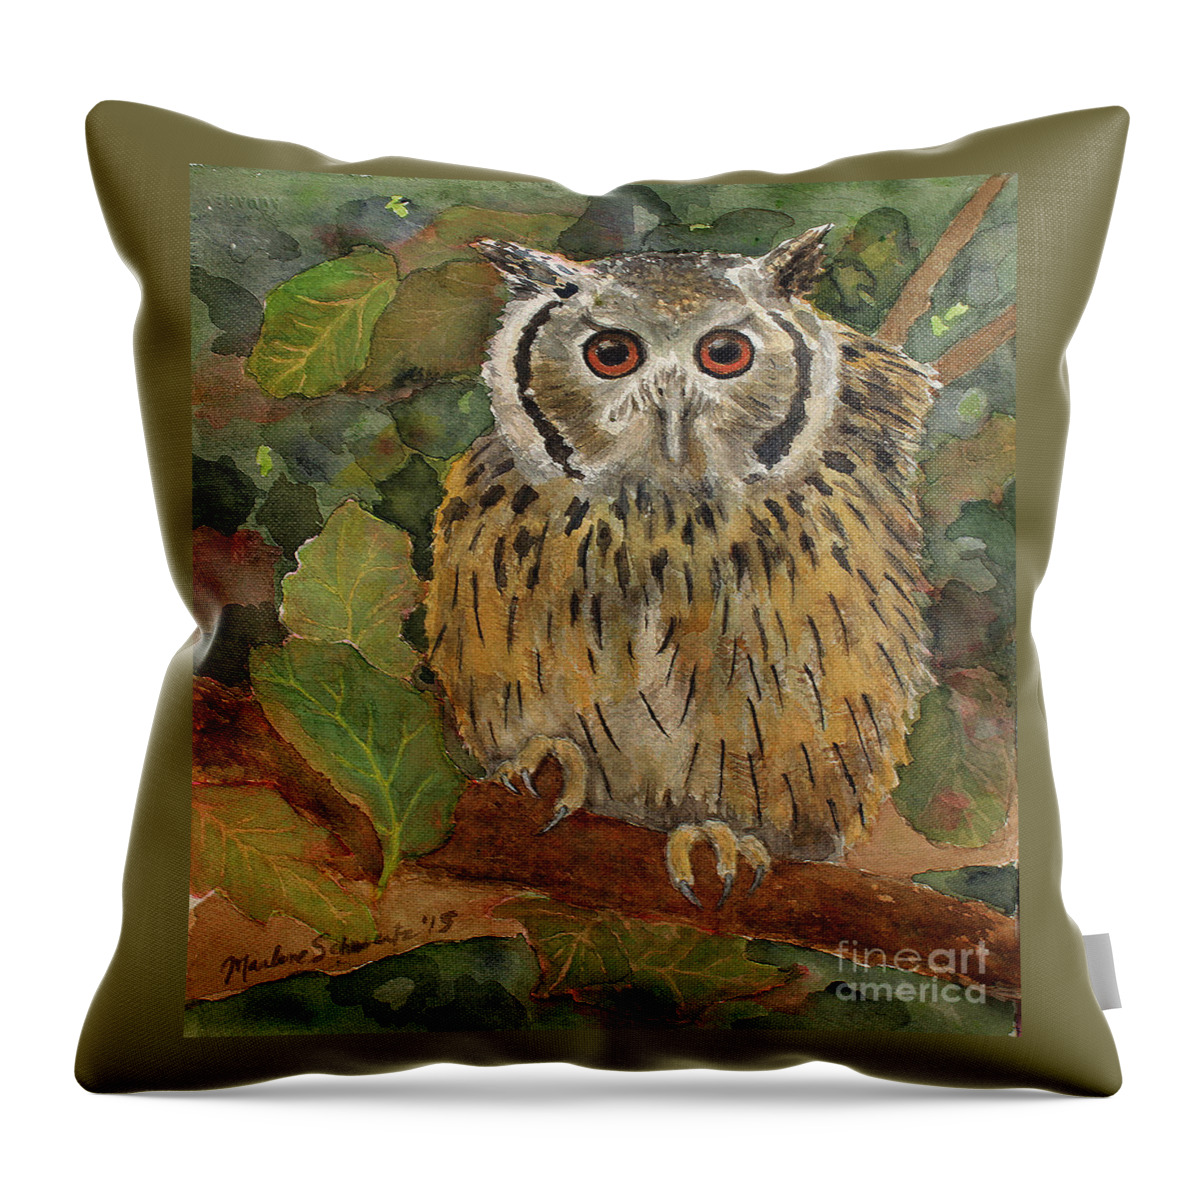 Owl Throw Pillow featuring the painting Wise Guy by Marlene Schwartz Massey